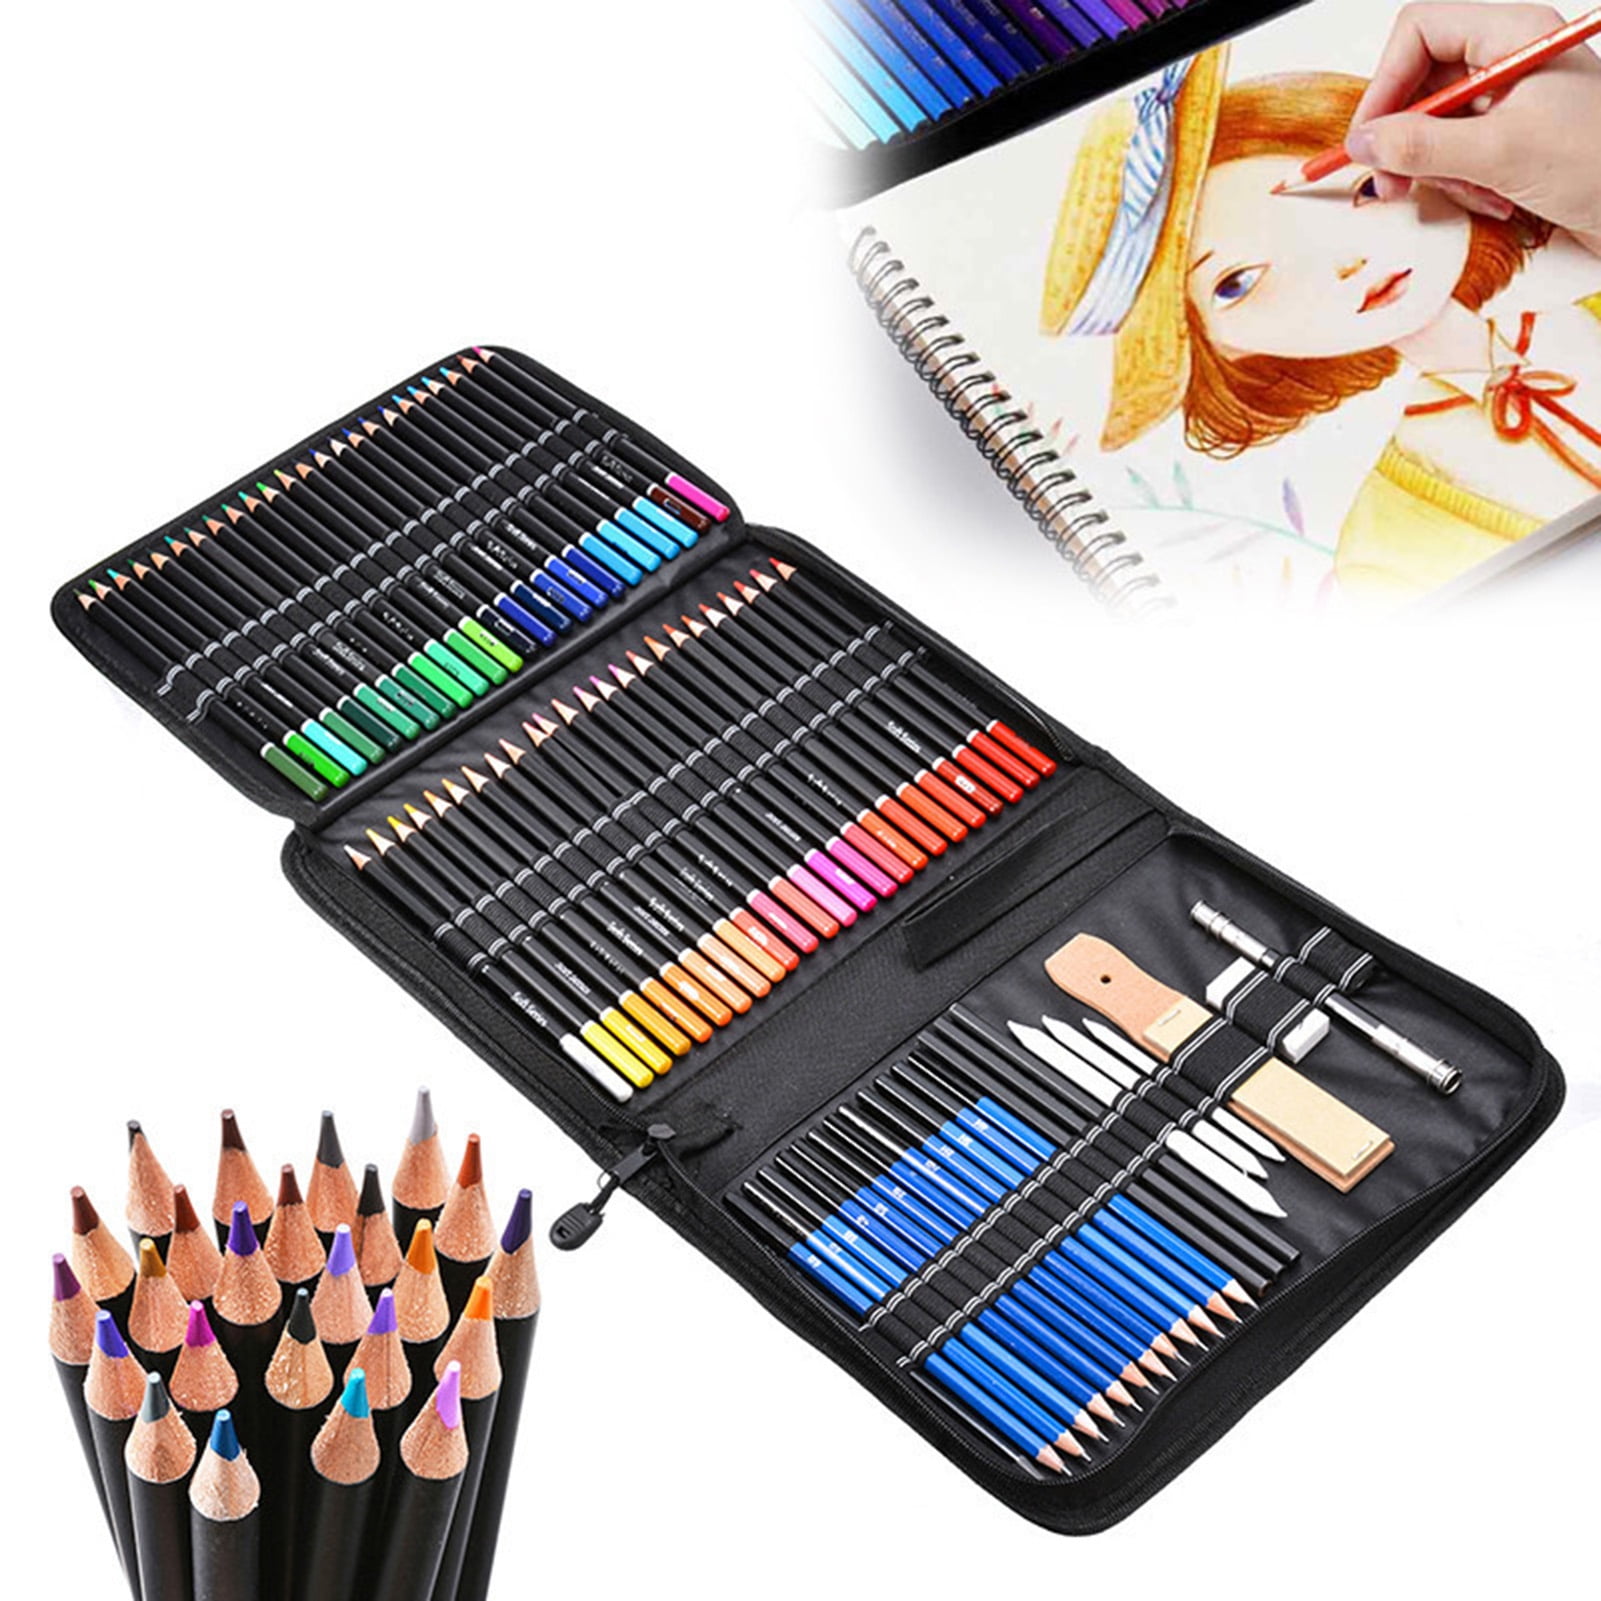 Soucolor 73-Pack Art Supplies for Adults Teens Kids Beginners Artist Drawing